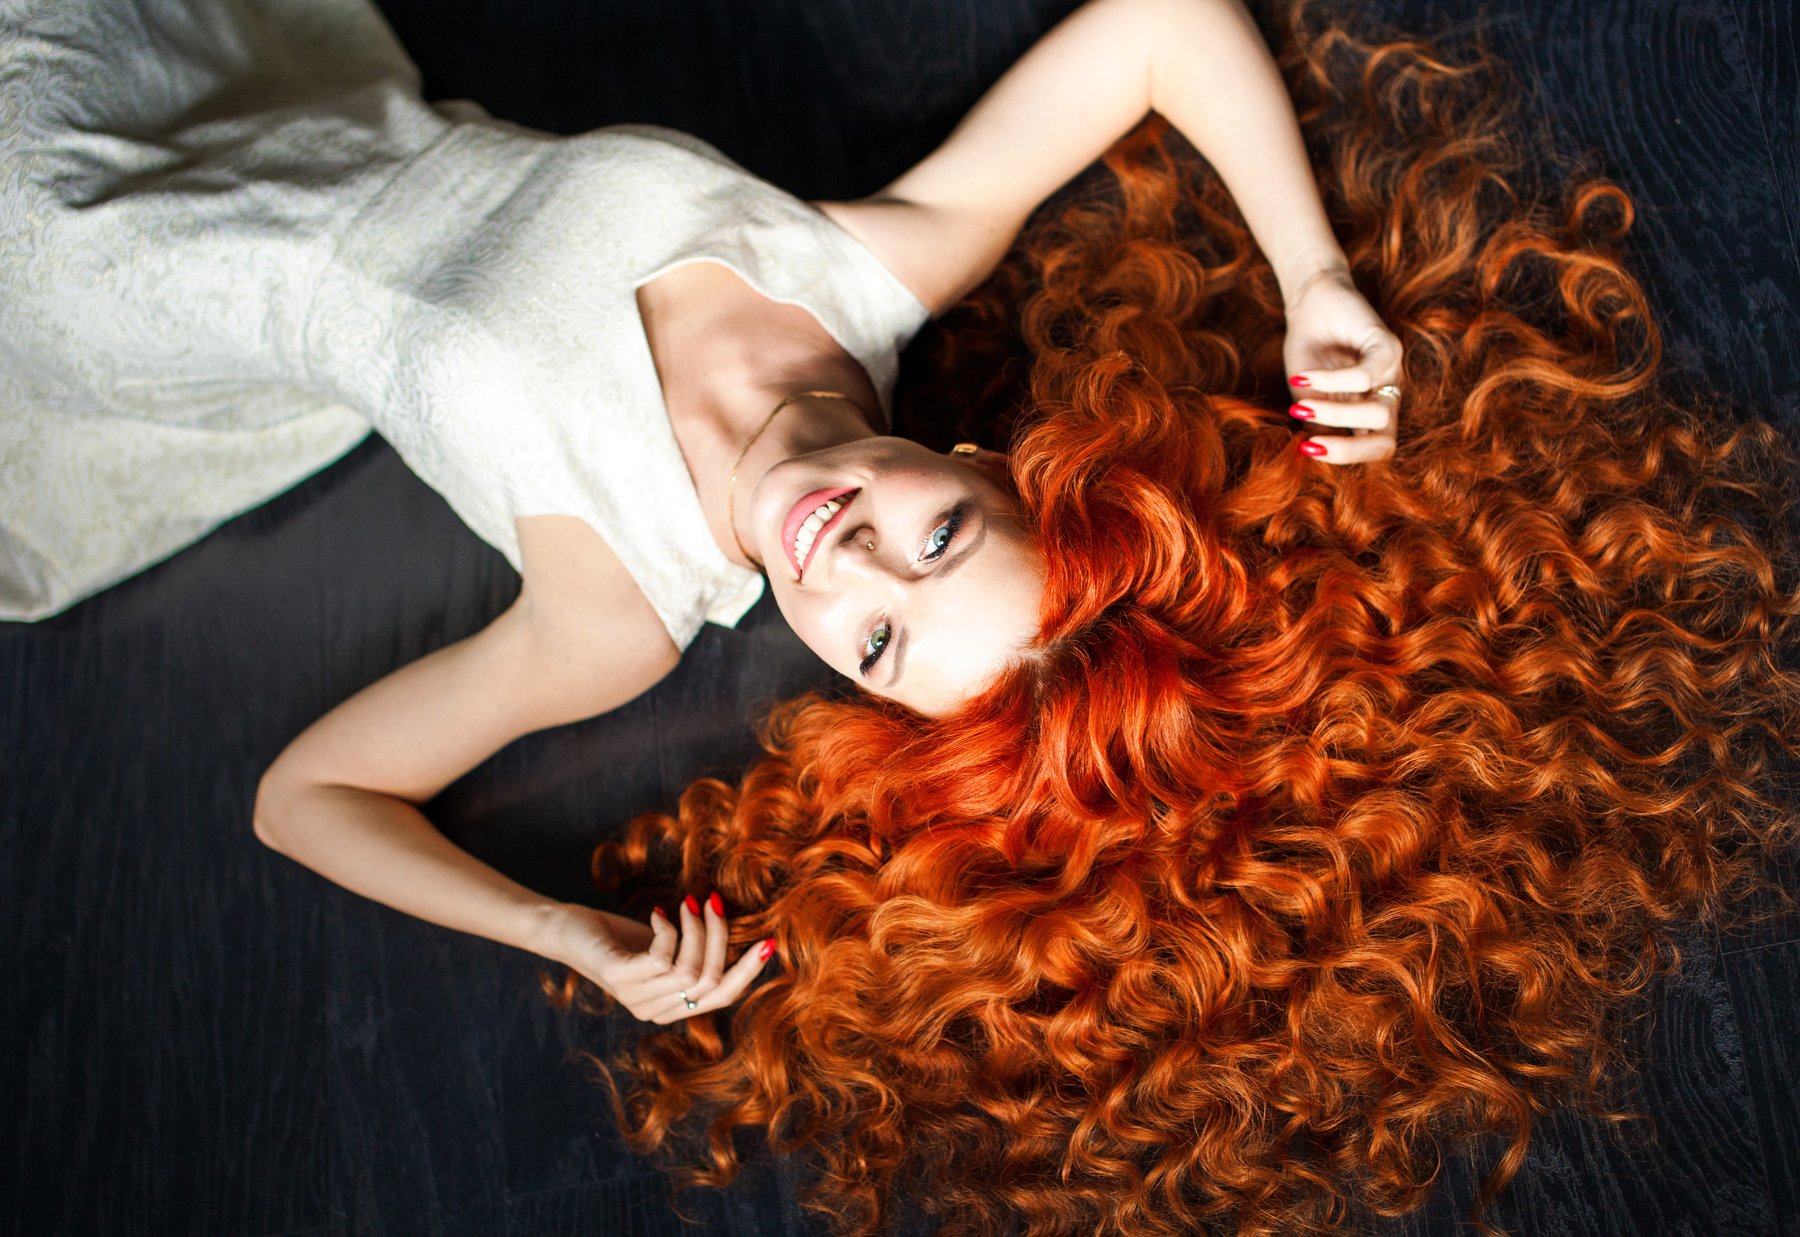 red, red hair, orange, curls, hairstyle, girl, beautiful, freckles, Sunny, spring, sun, dandelion, model, smile, bright smile, beauty contest, beauty,, Фомина Екатерина